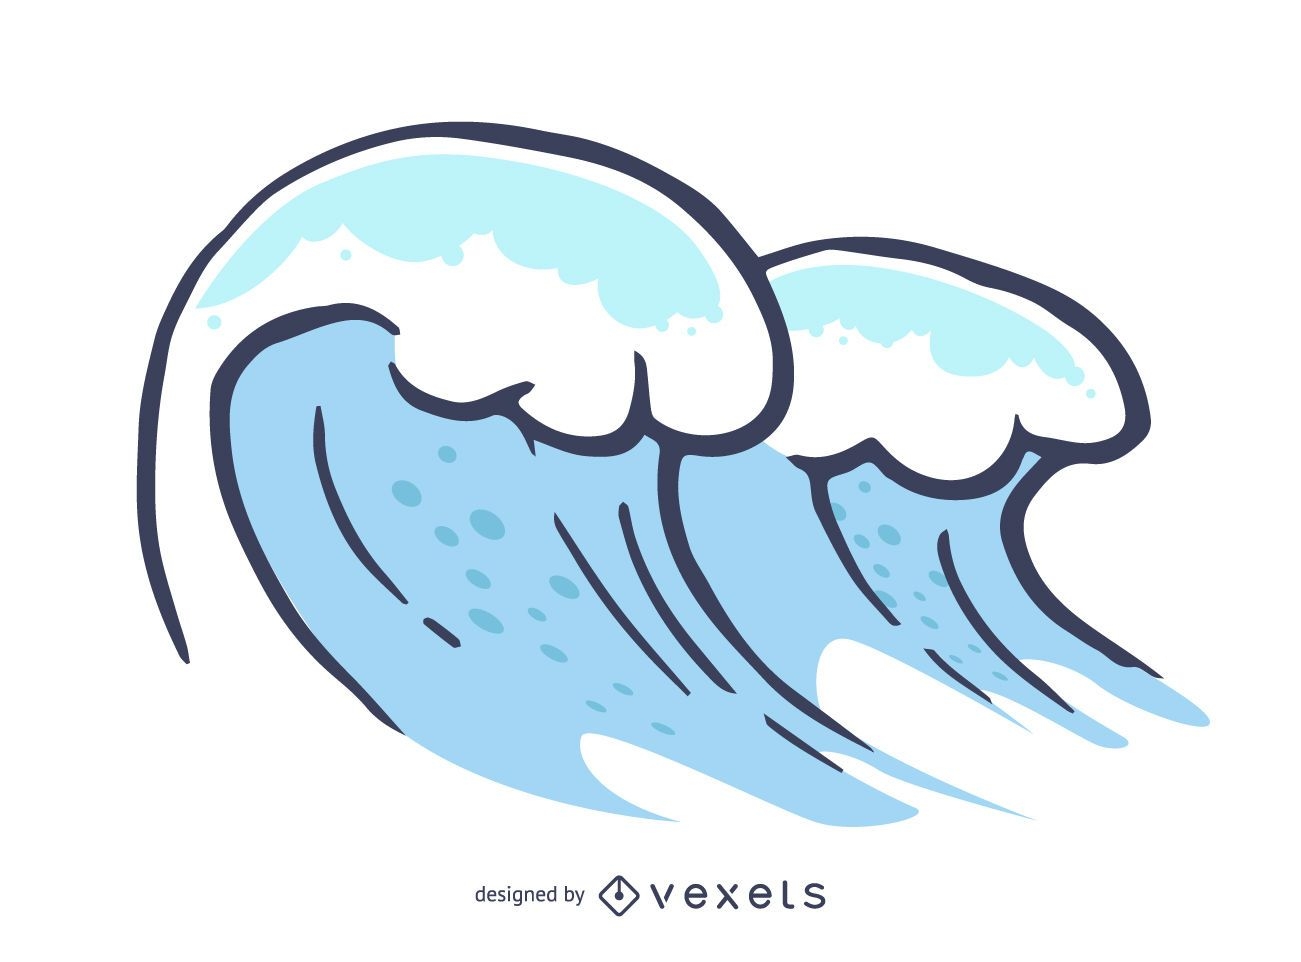 Hand illustrated waves